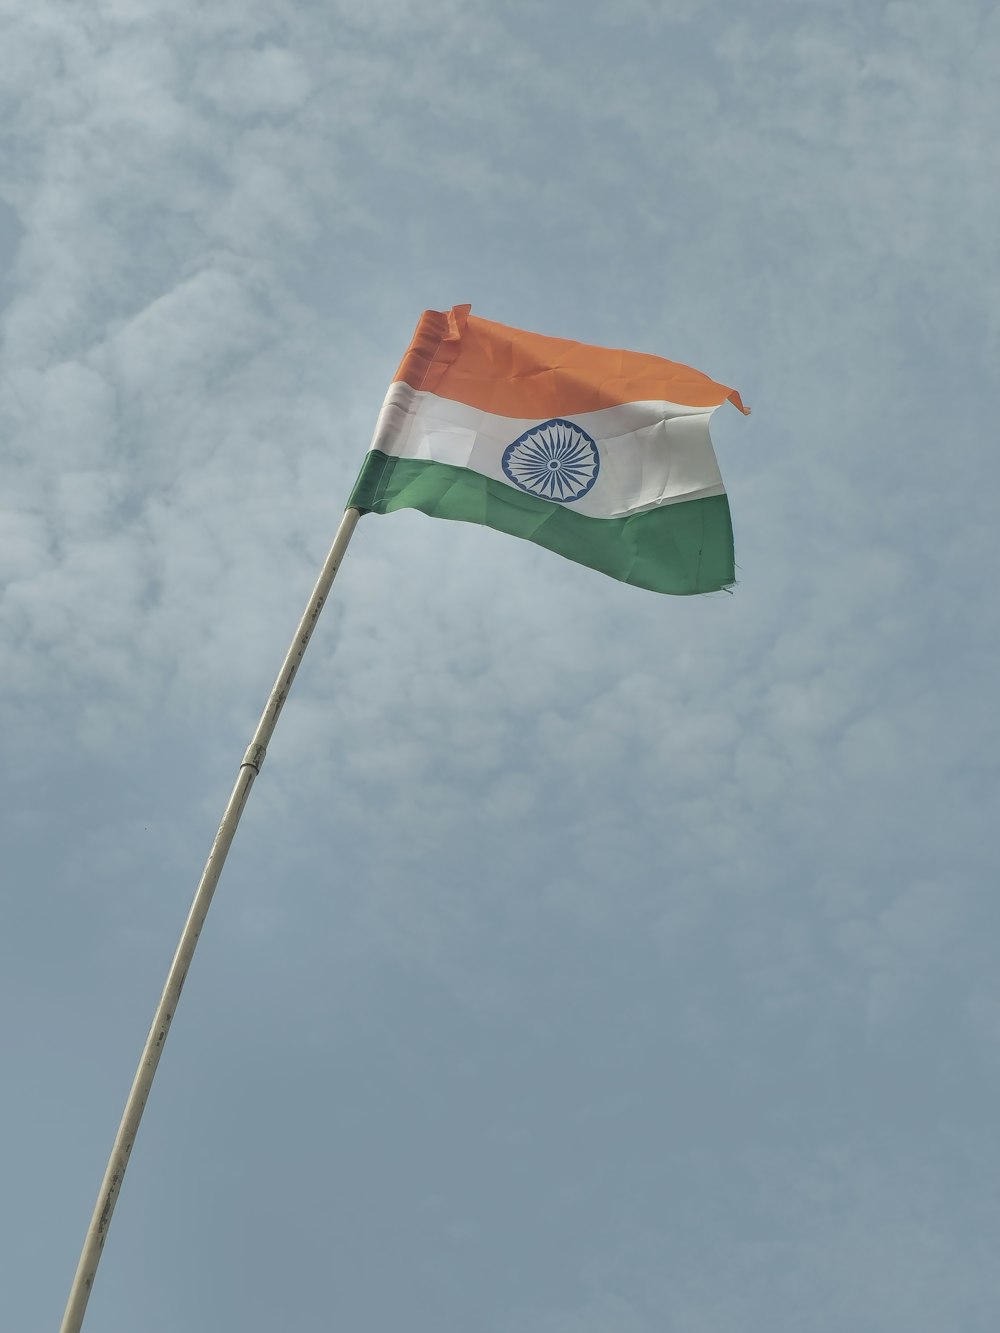 the indian flag is flying high in the sky